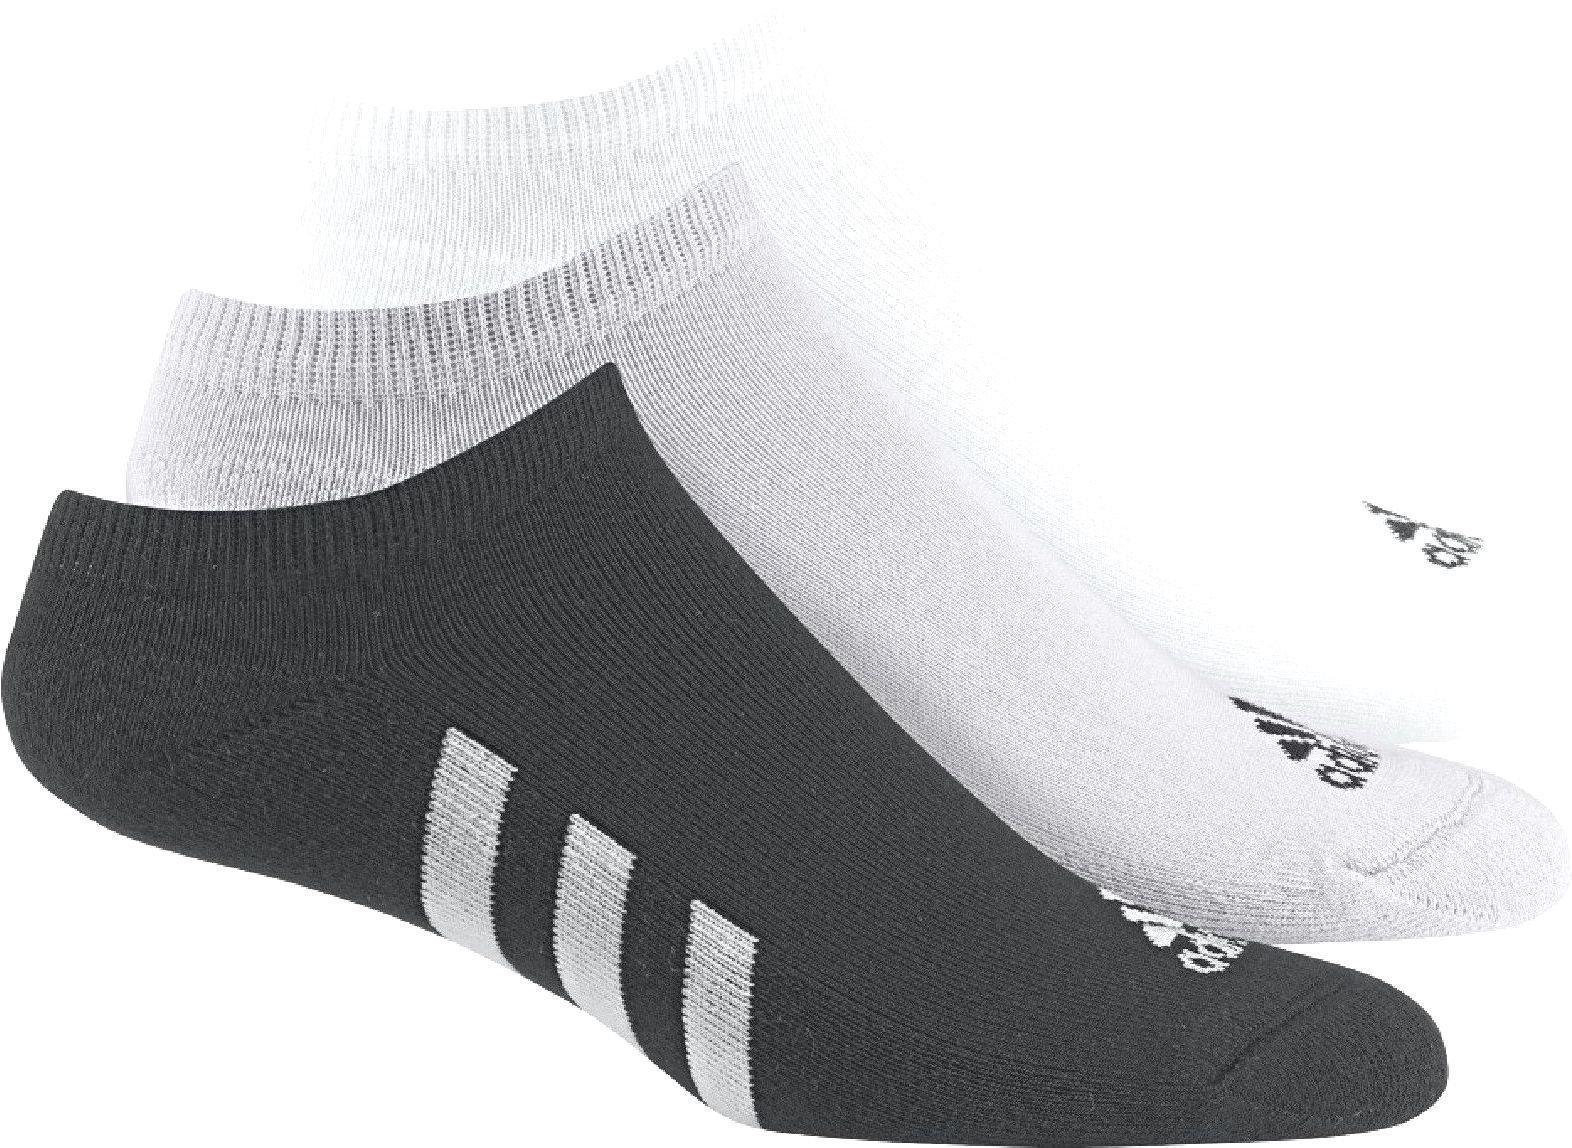 Chaussettes Adidas 3-Pack Chaussettes